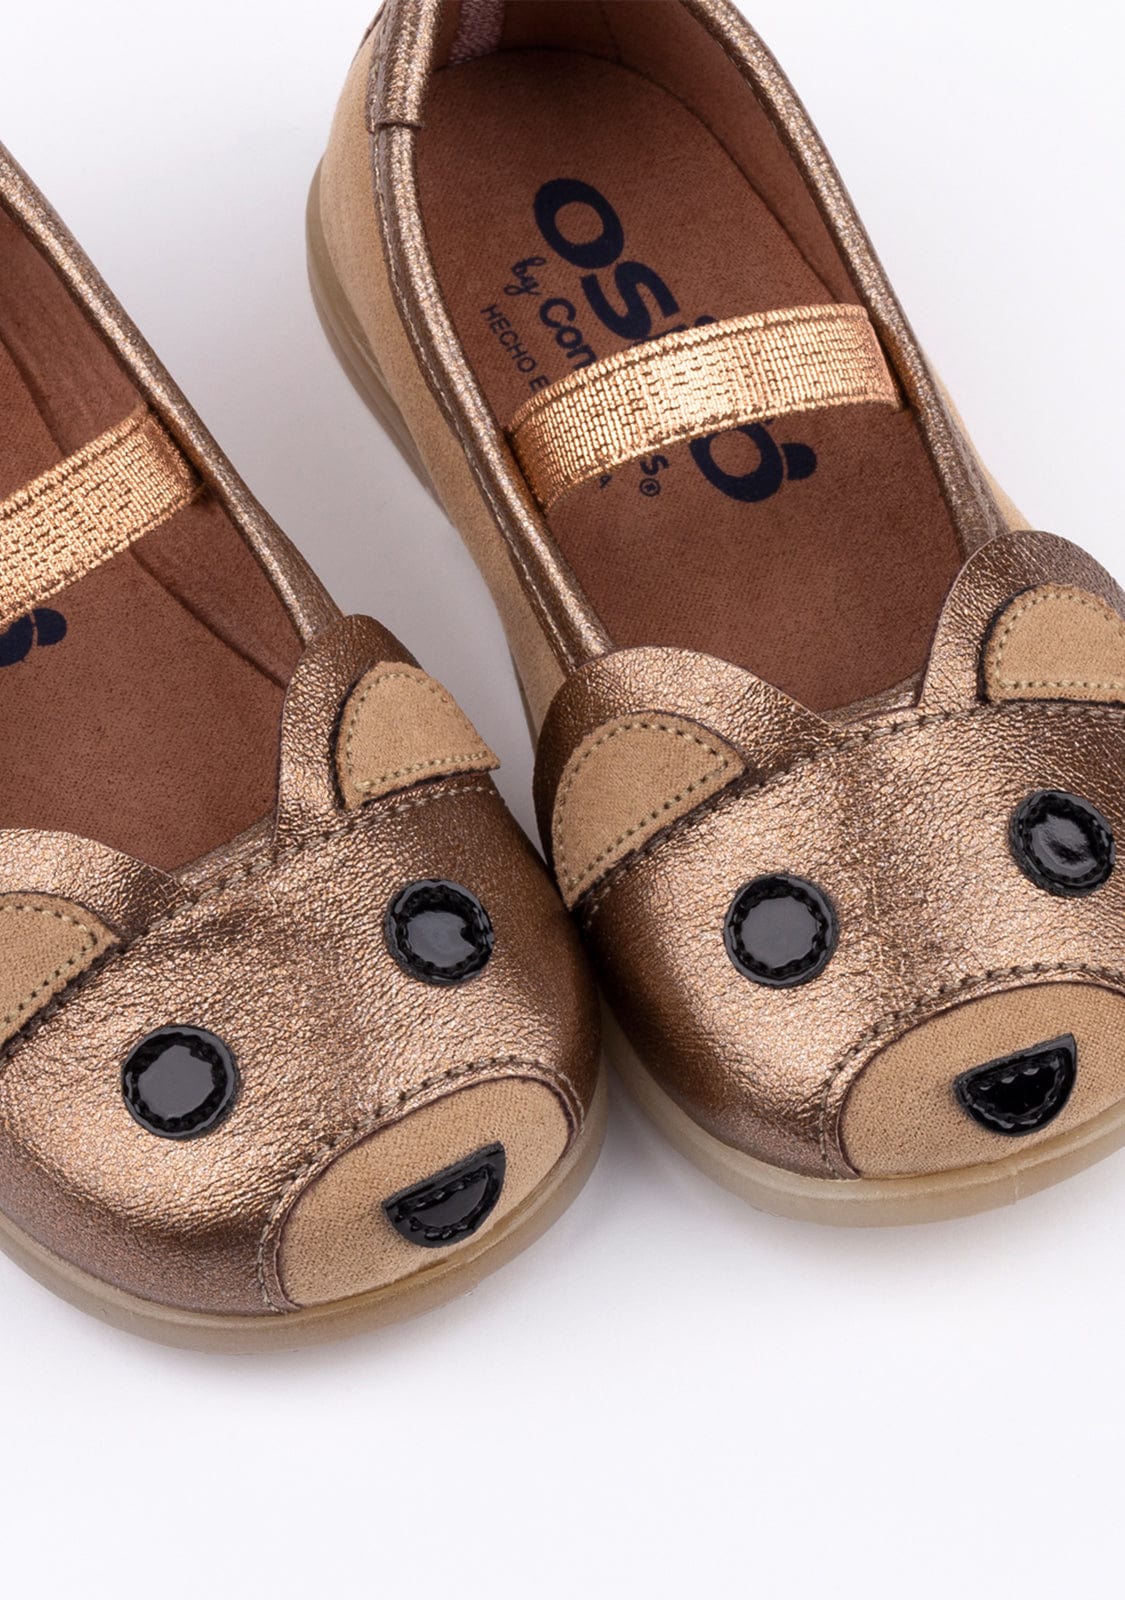 OSITO Shoes Baby's Brown Teddy Glows in the Dark Ballerinas